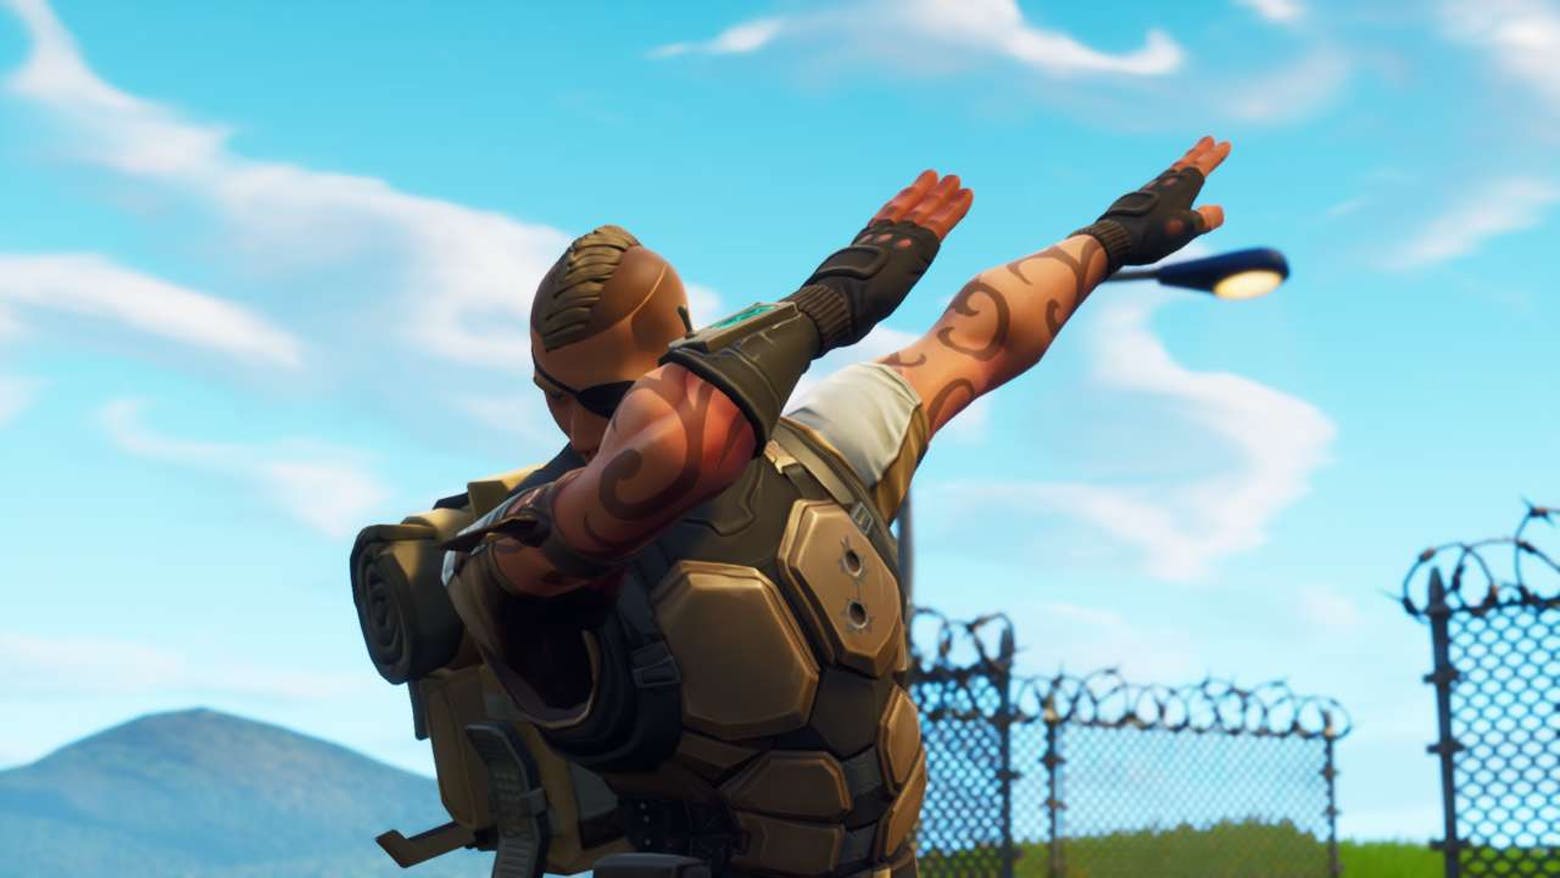 A Fornite character doing the Dab